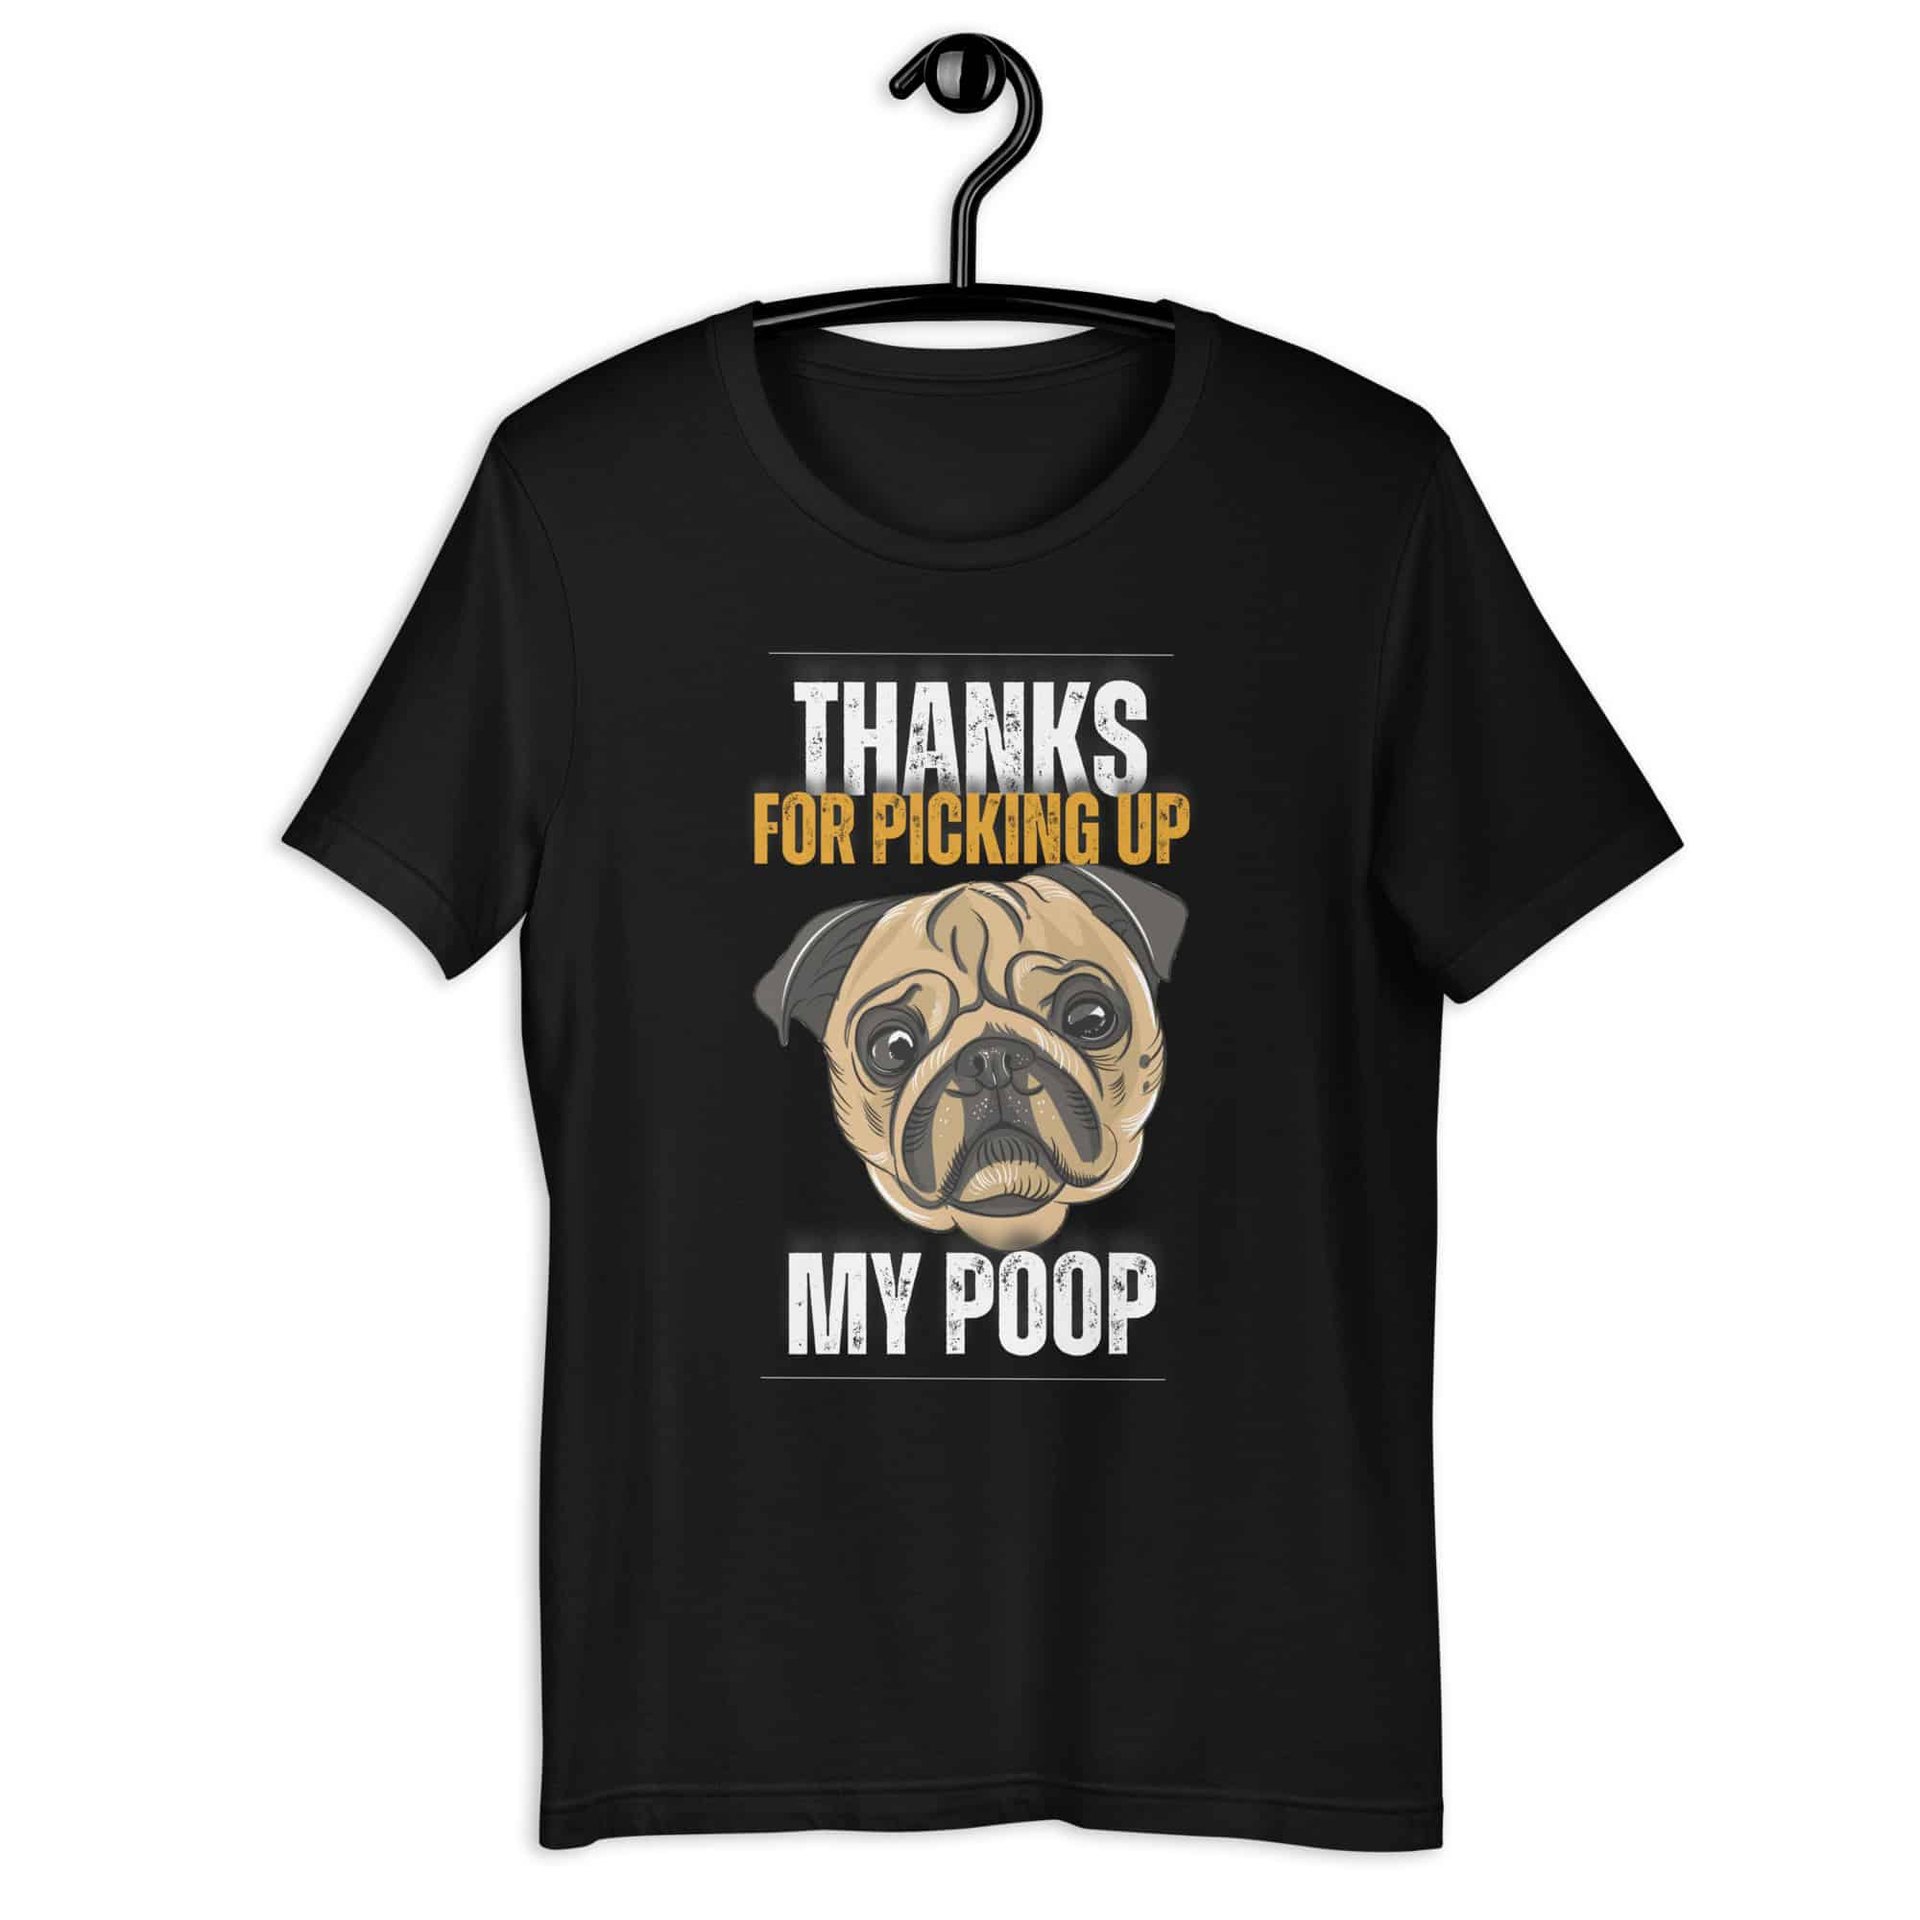 Thanks For Picking Up My POOP Funny Bulldog Unisex T-Shir. Black